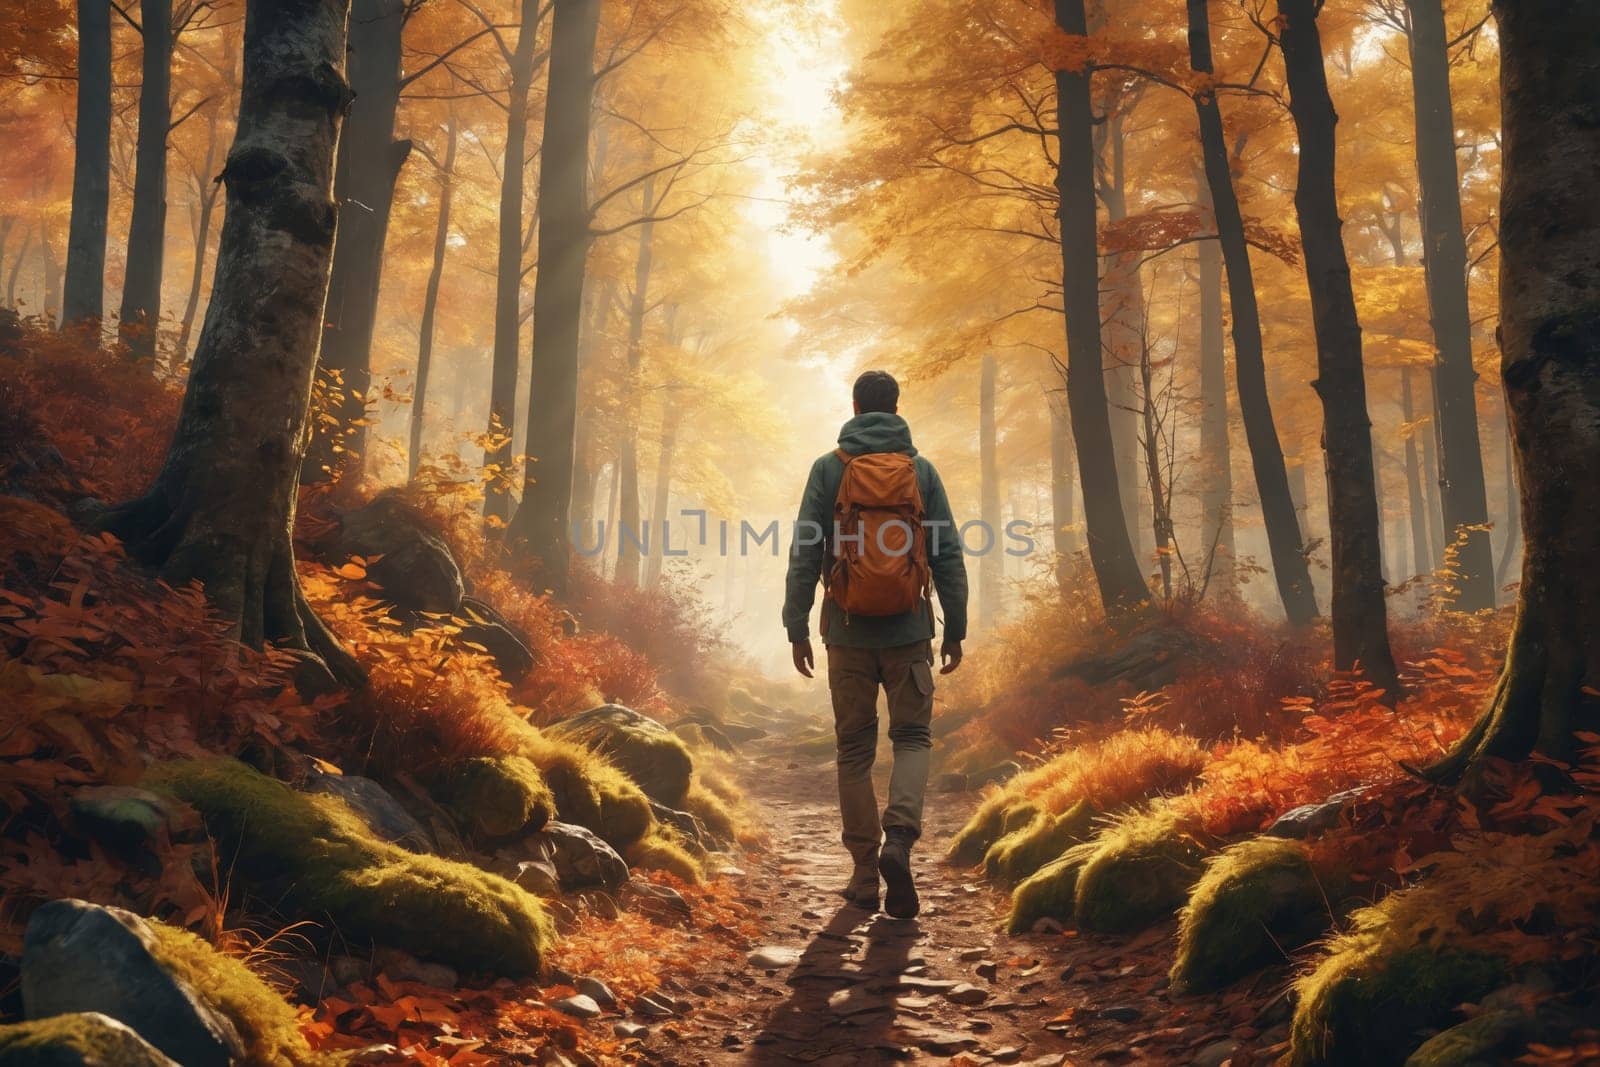 The image encapsulates the essence of autumn travel with a scenic view that talks about the serenity and splendor of the season. Great for use in content for autumn vacation ideas and seasonal transitions.